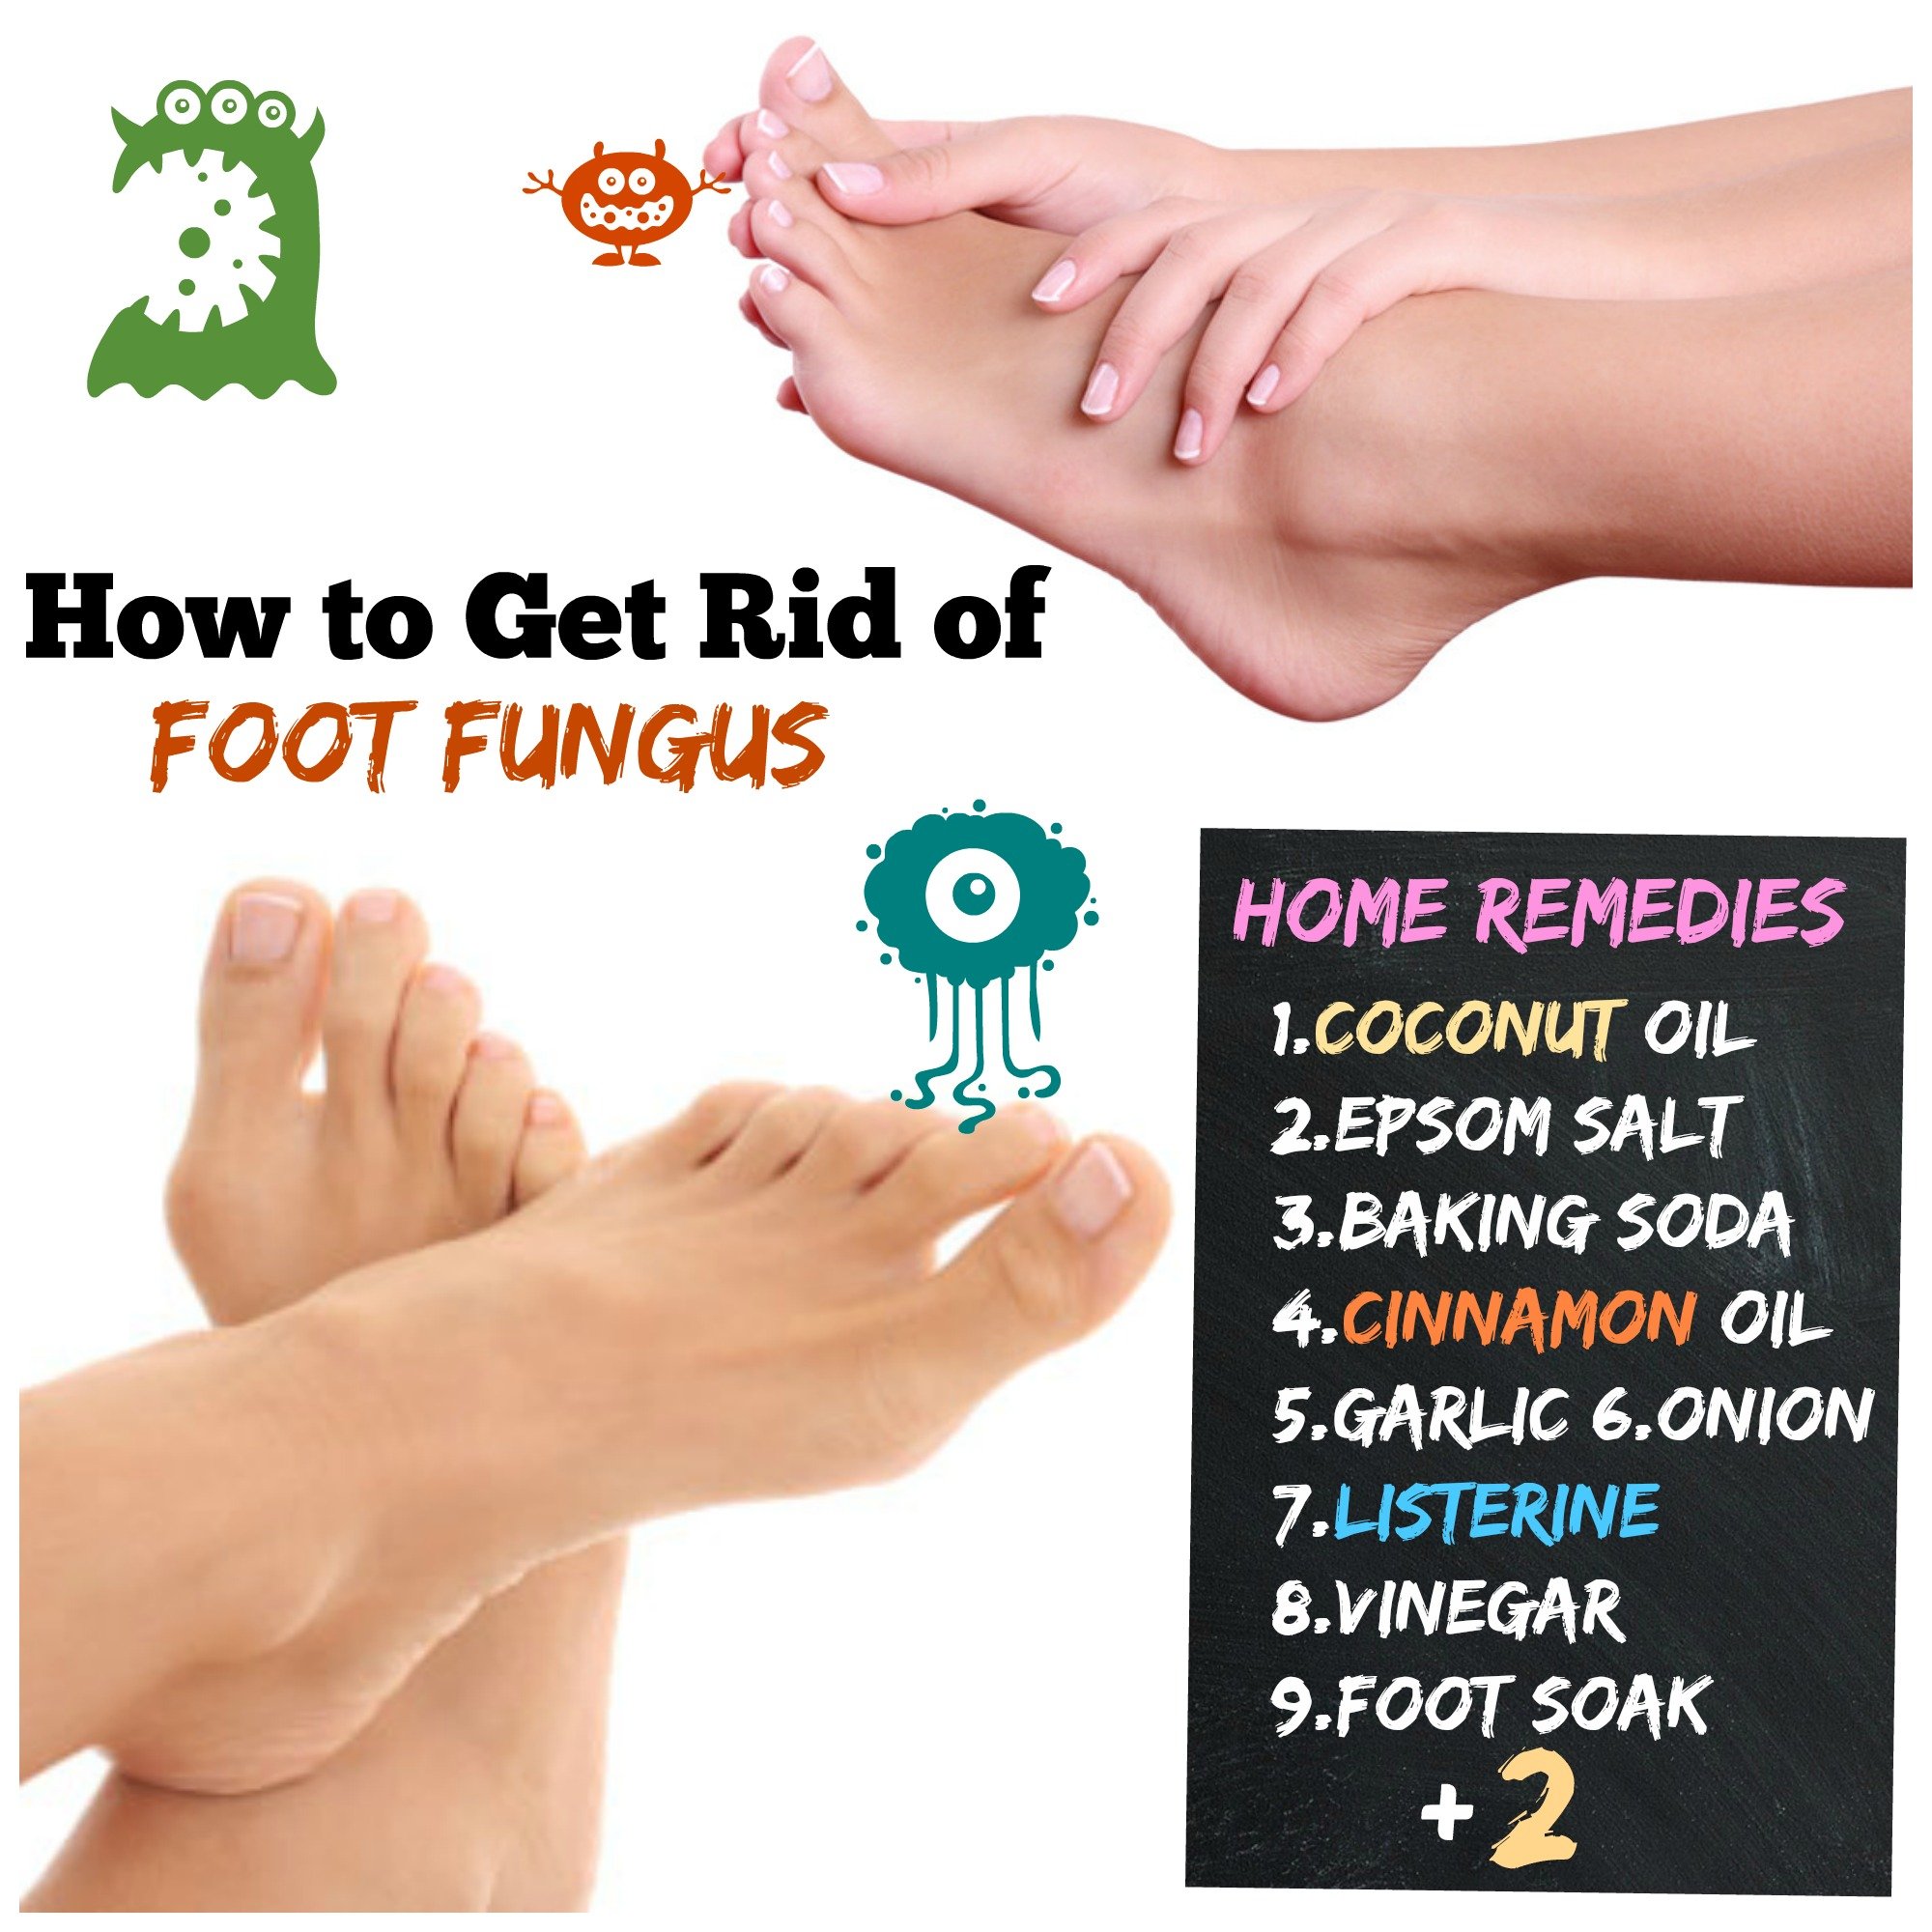 How to Get Rid of Foot Fungus #11 Athlete